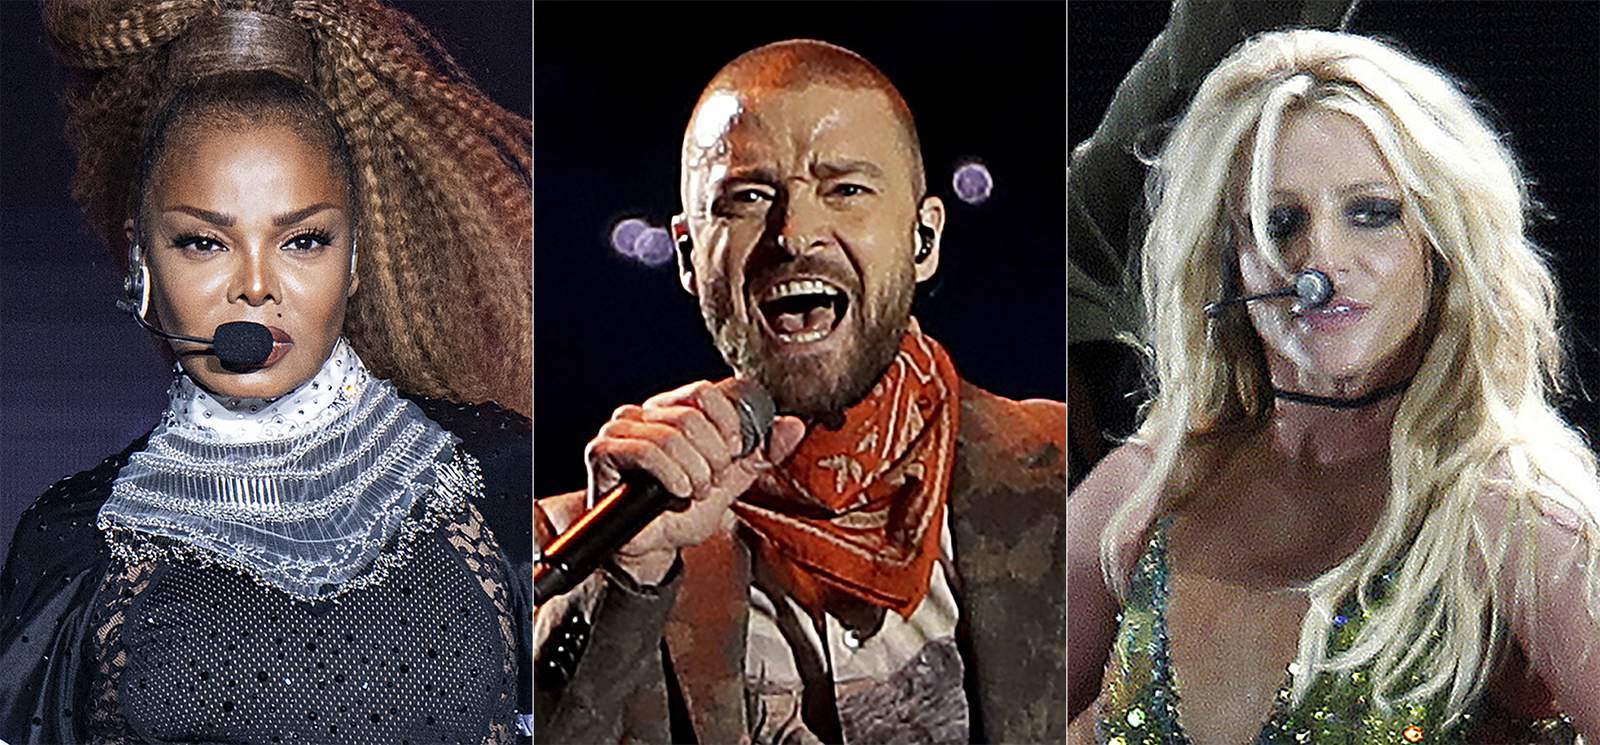 Timberlake apologizes to Britney Spears and Janet Jackson